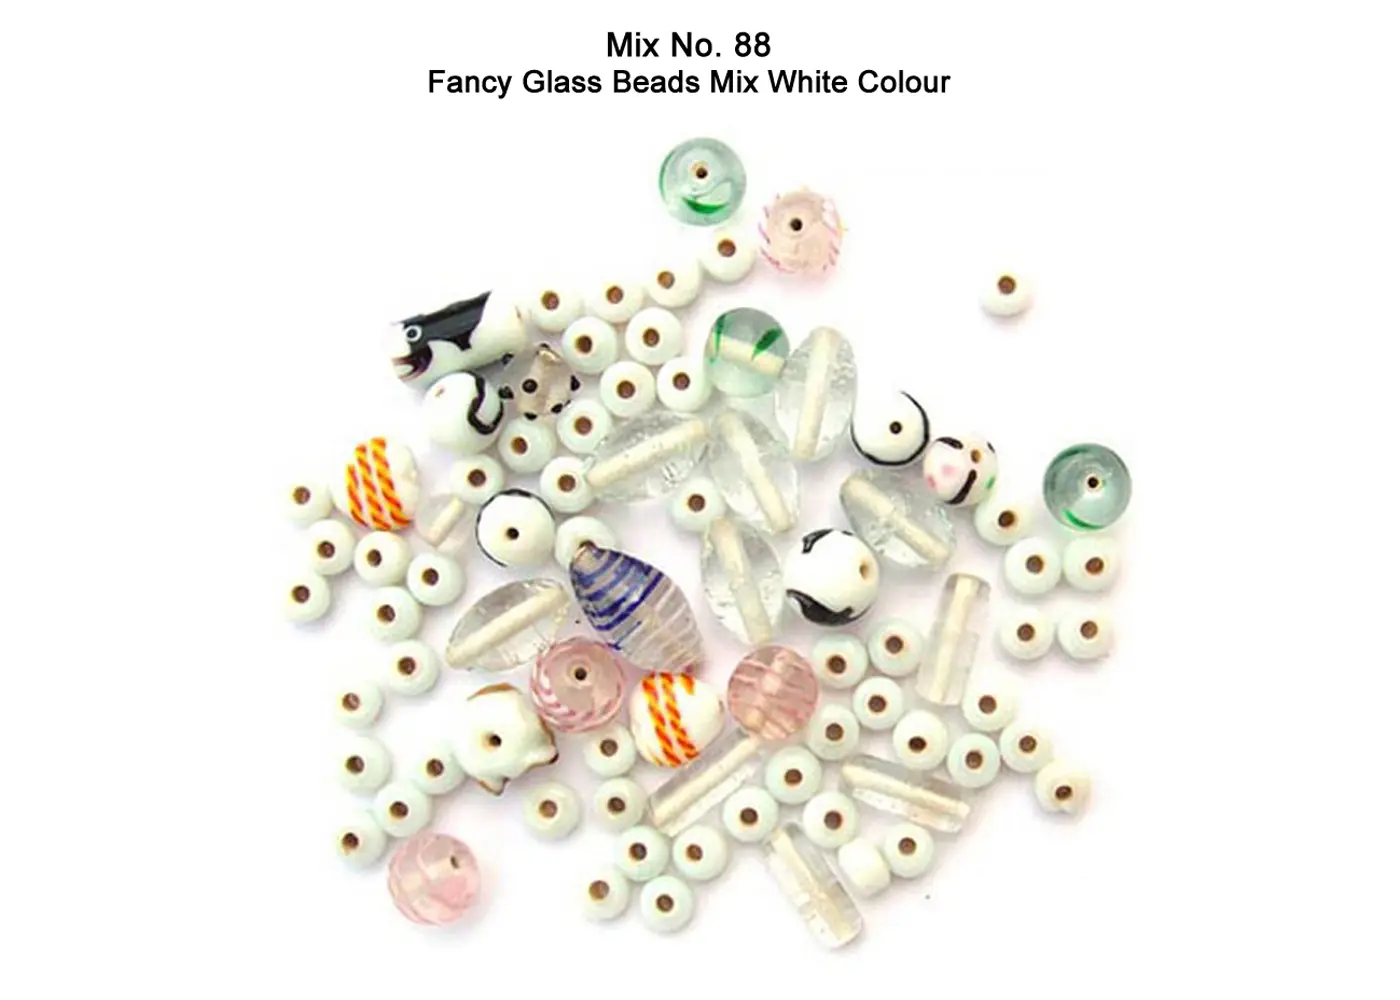 Fancy Bead mix in white color